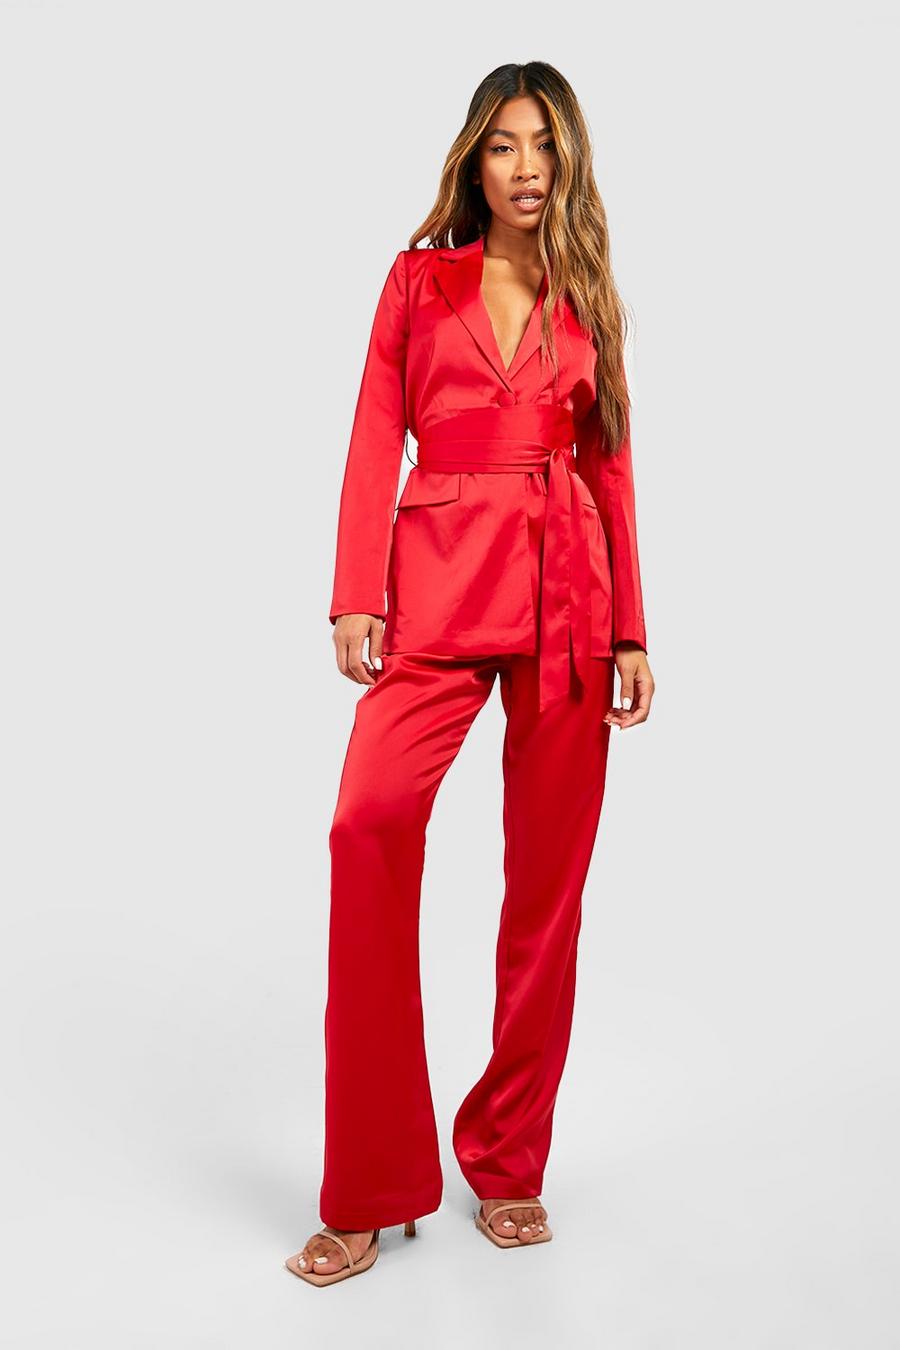 Red Matte Satin Fit & Flare Tailored Pants